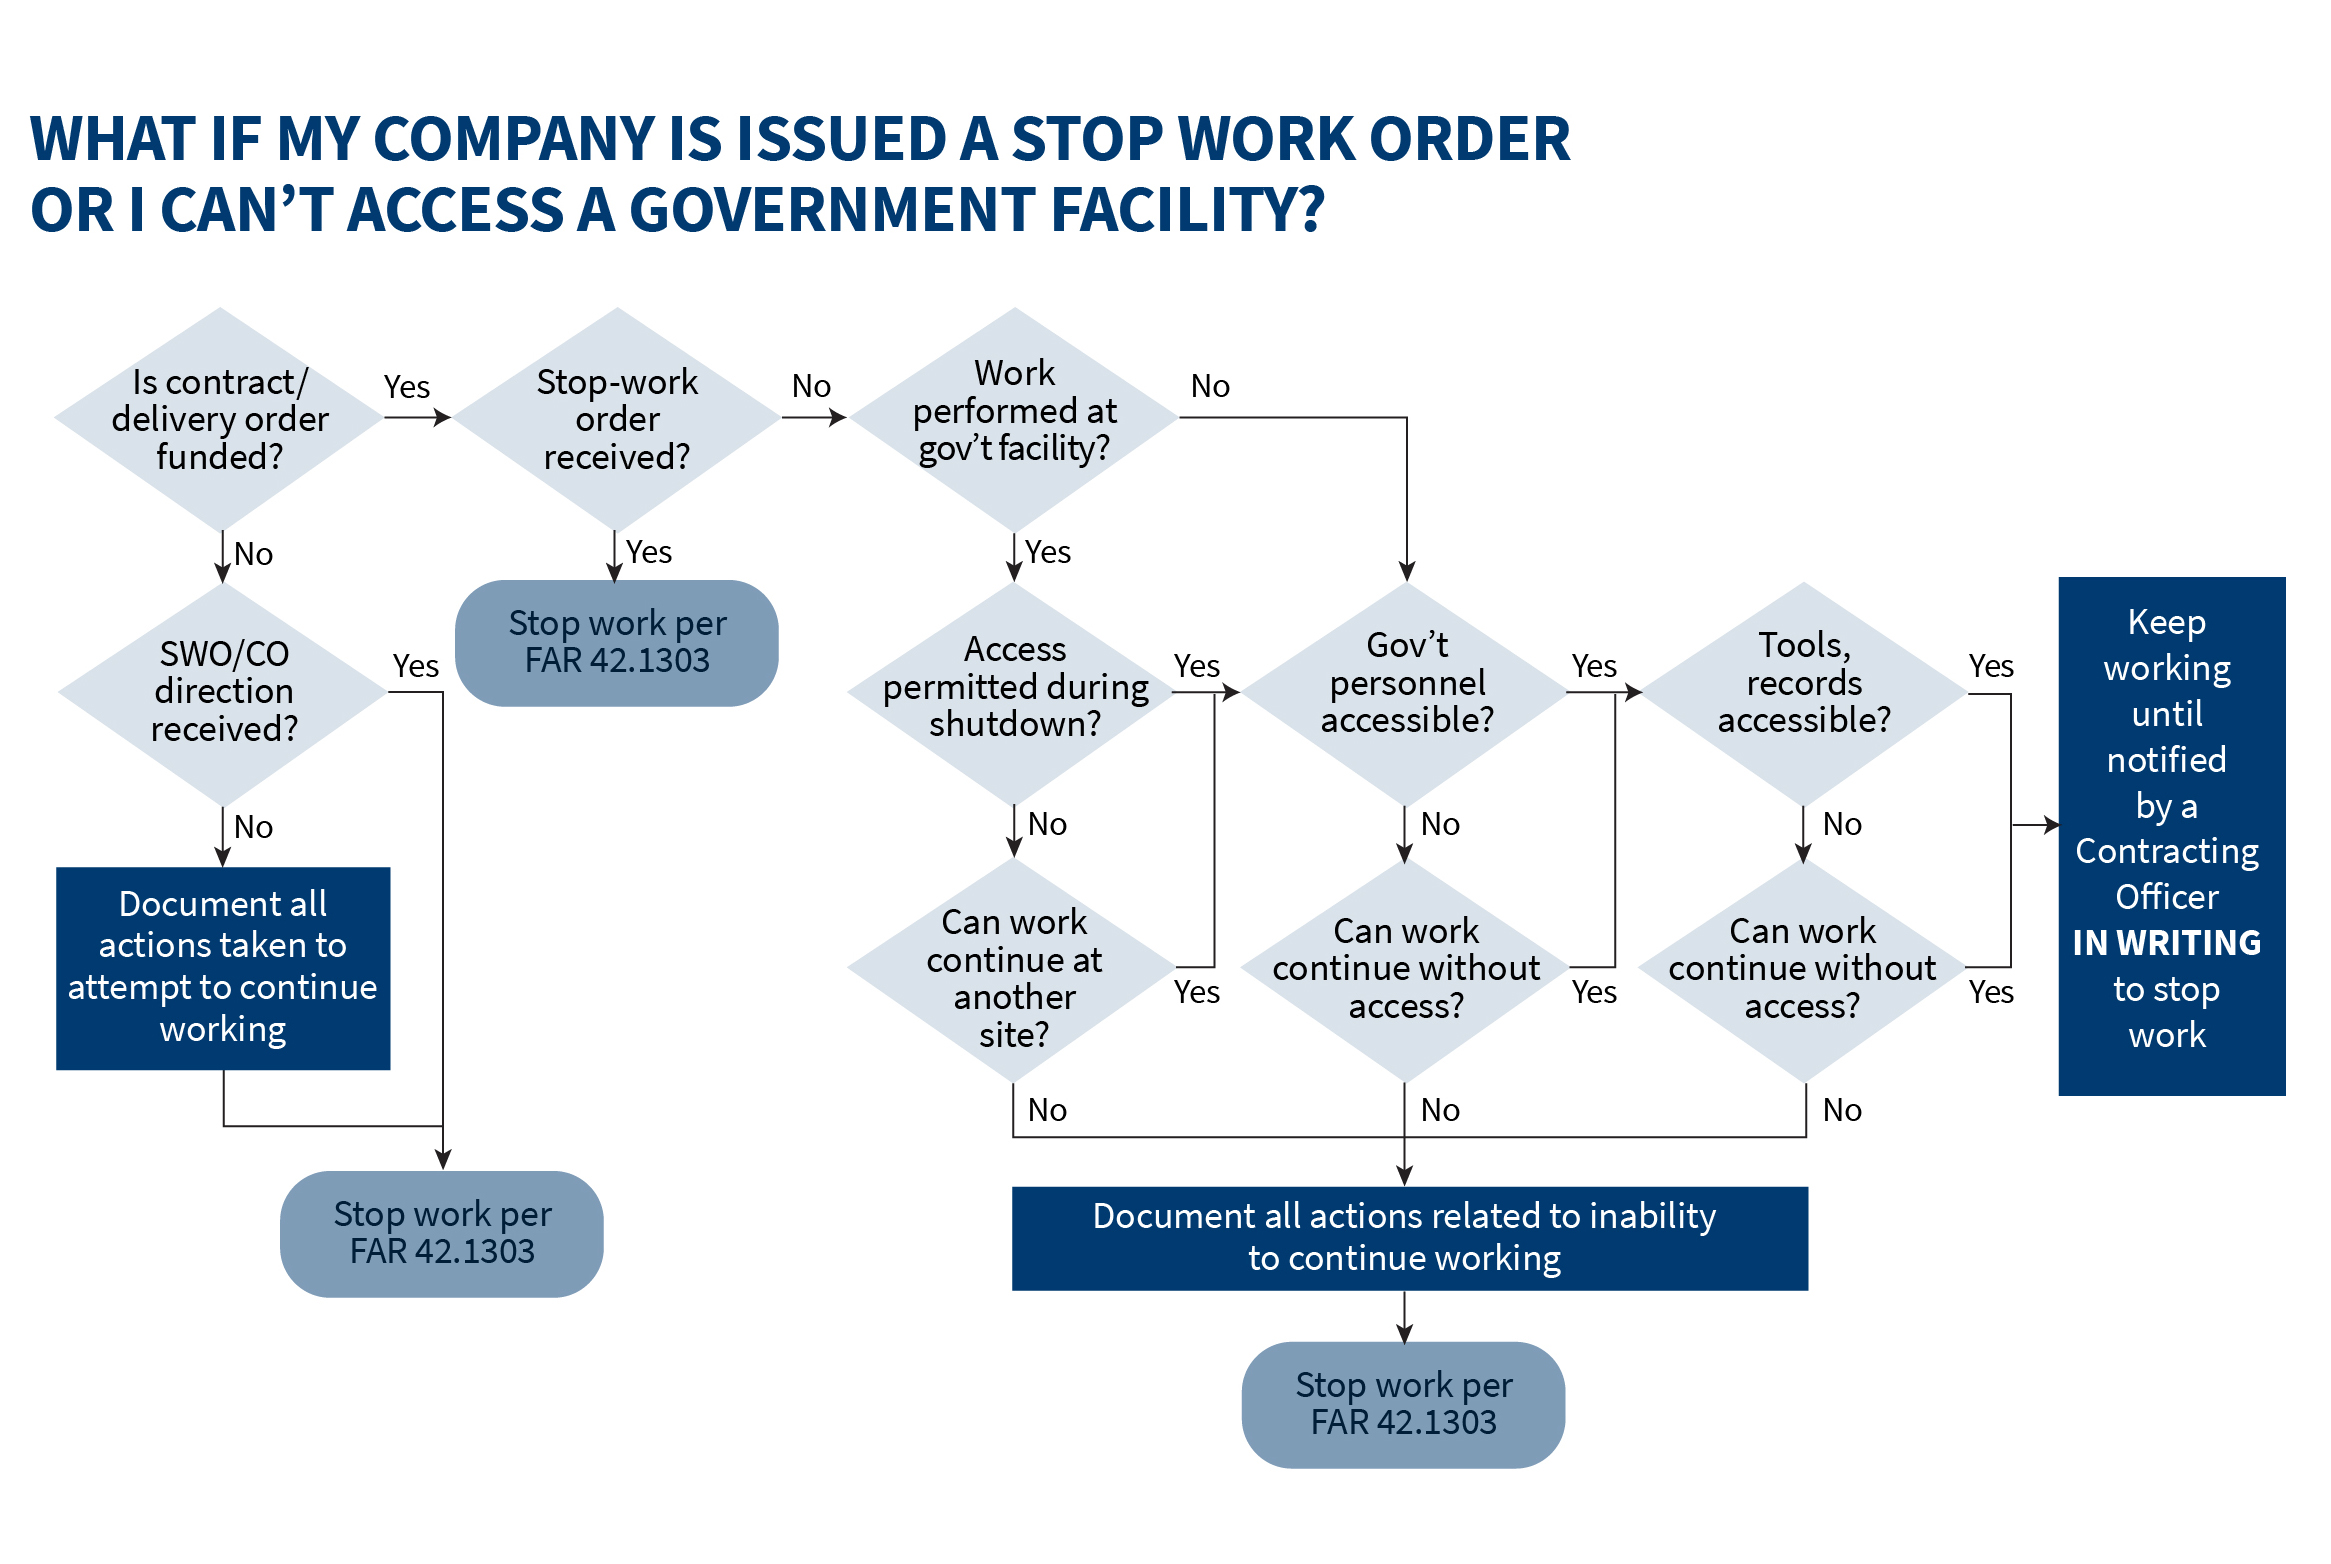 infographic showing what if my company is issued a stop work order or I can't access a government facility